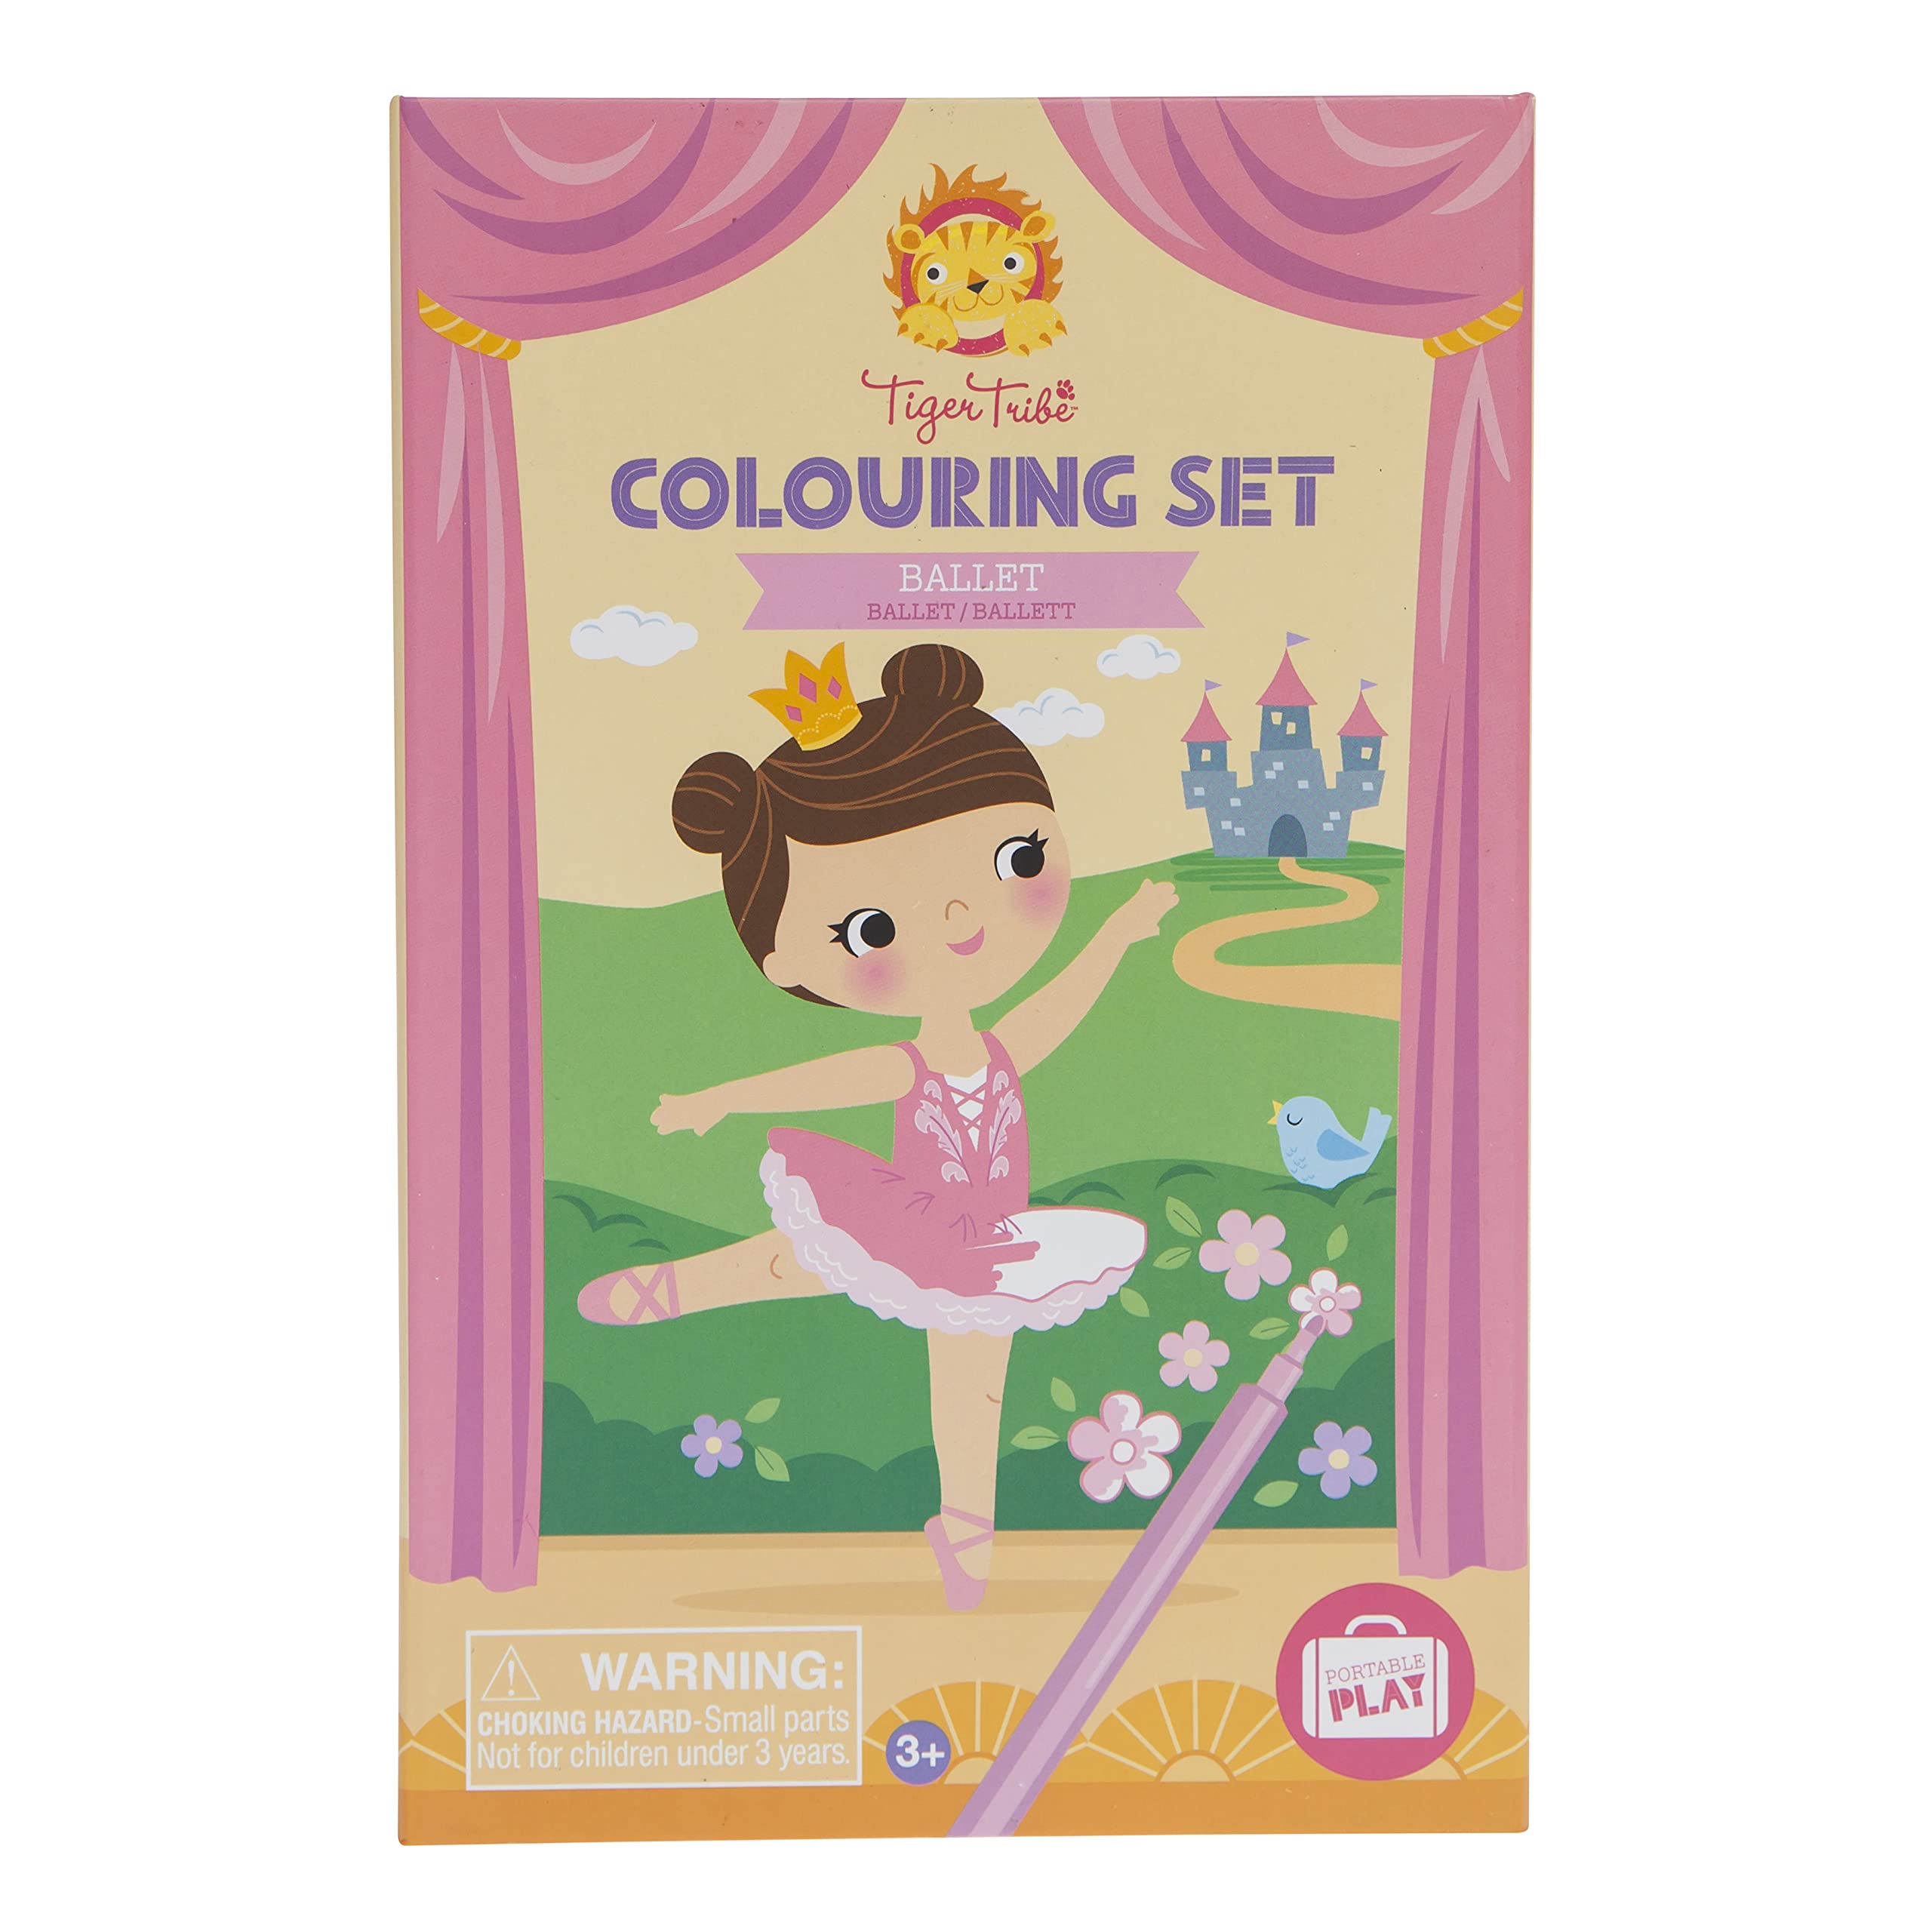 Tiger Tribe Schylling Ballet Coloring Set - Travel Take Along Art Kit - All Supplies Included - Easy Storage - Ages 3+ - 14014, Small